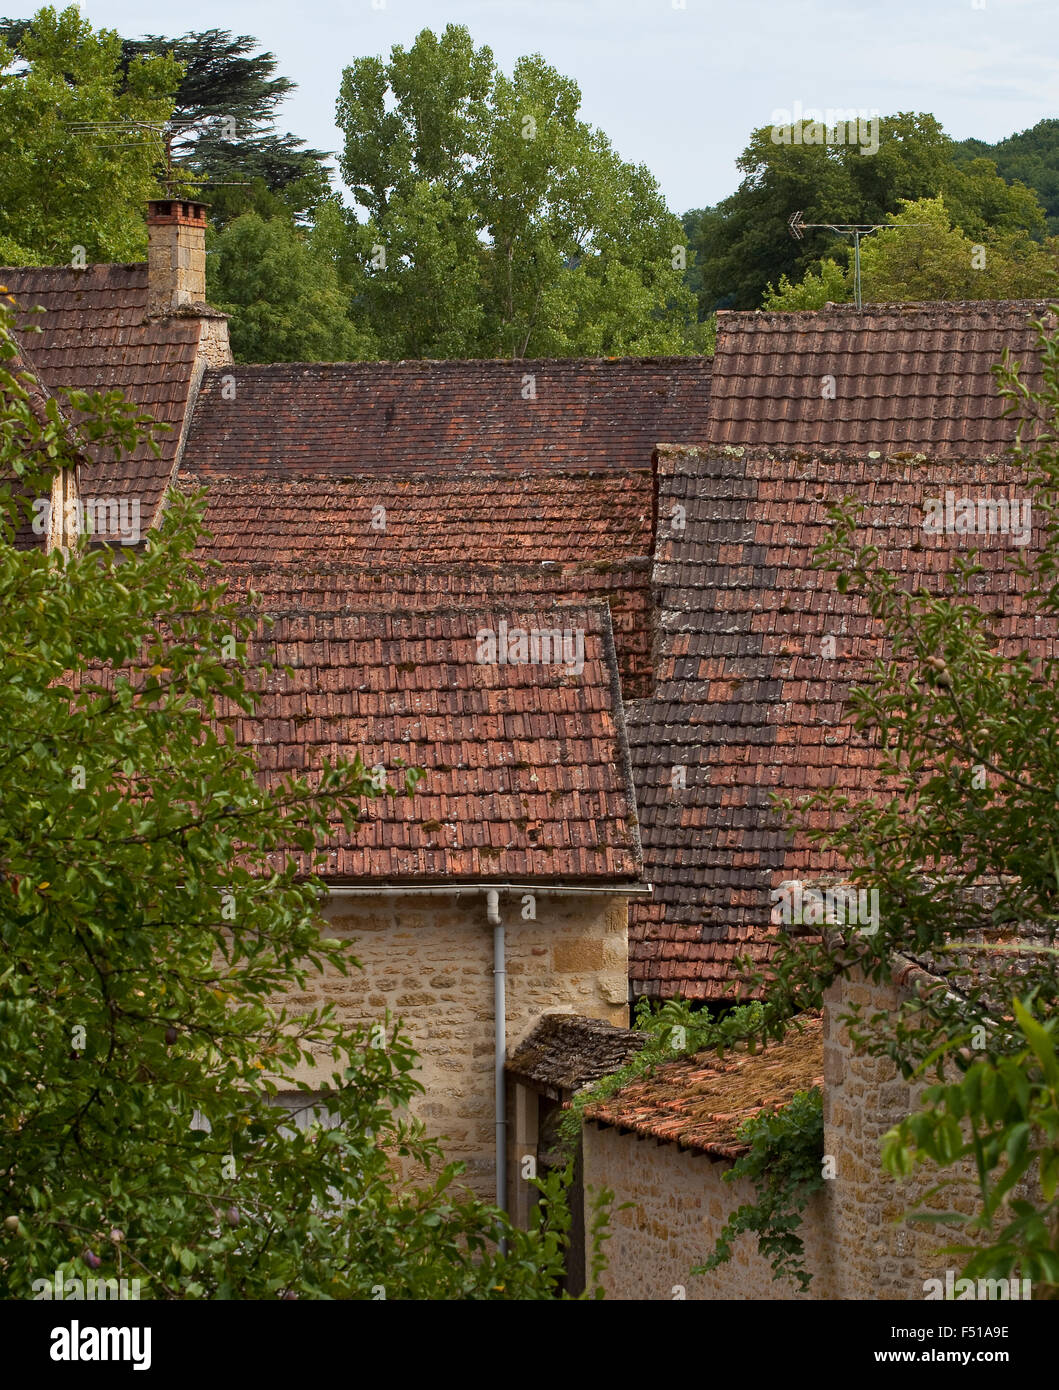 A small village in France has its buildings cluttered and crushed together. The image shows a detail of the village roofs in amo Stock Photo